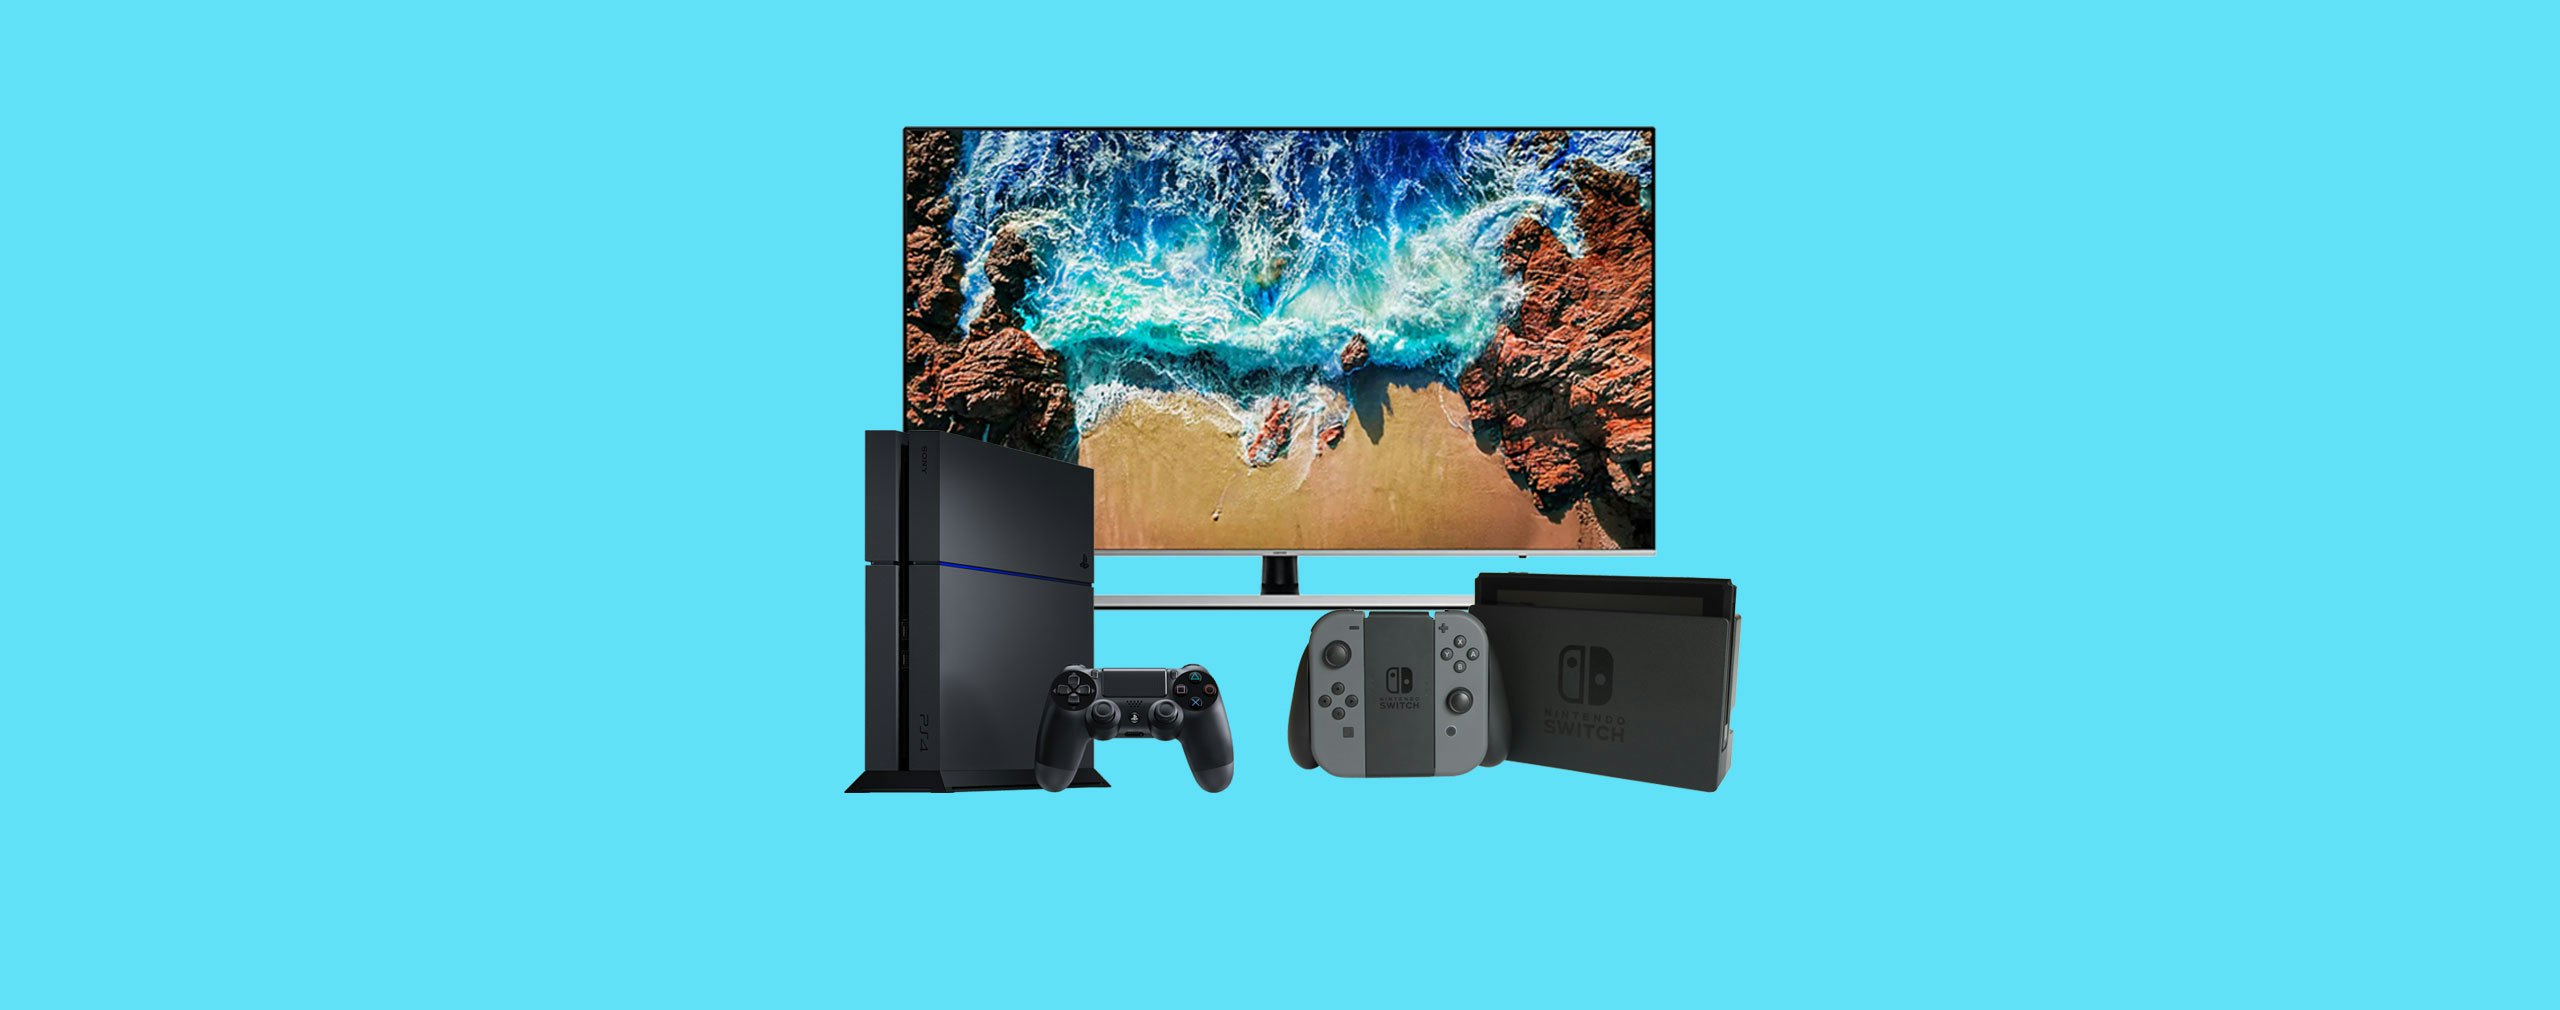 prime day 2019 video game deals